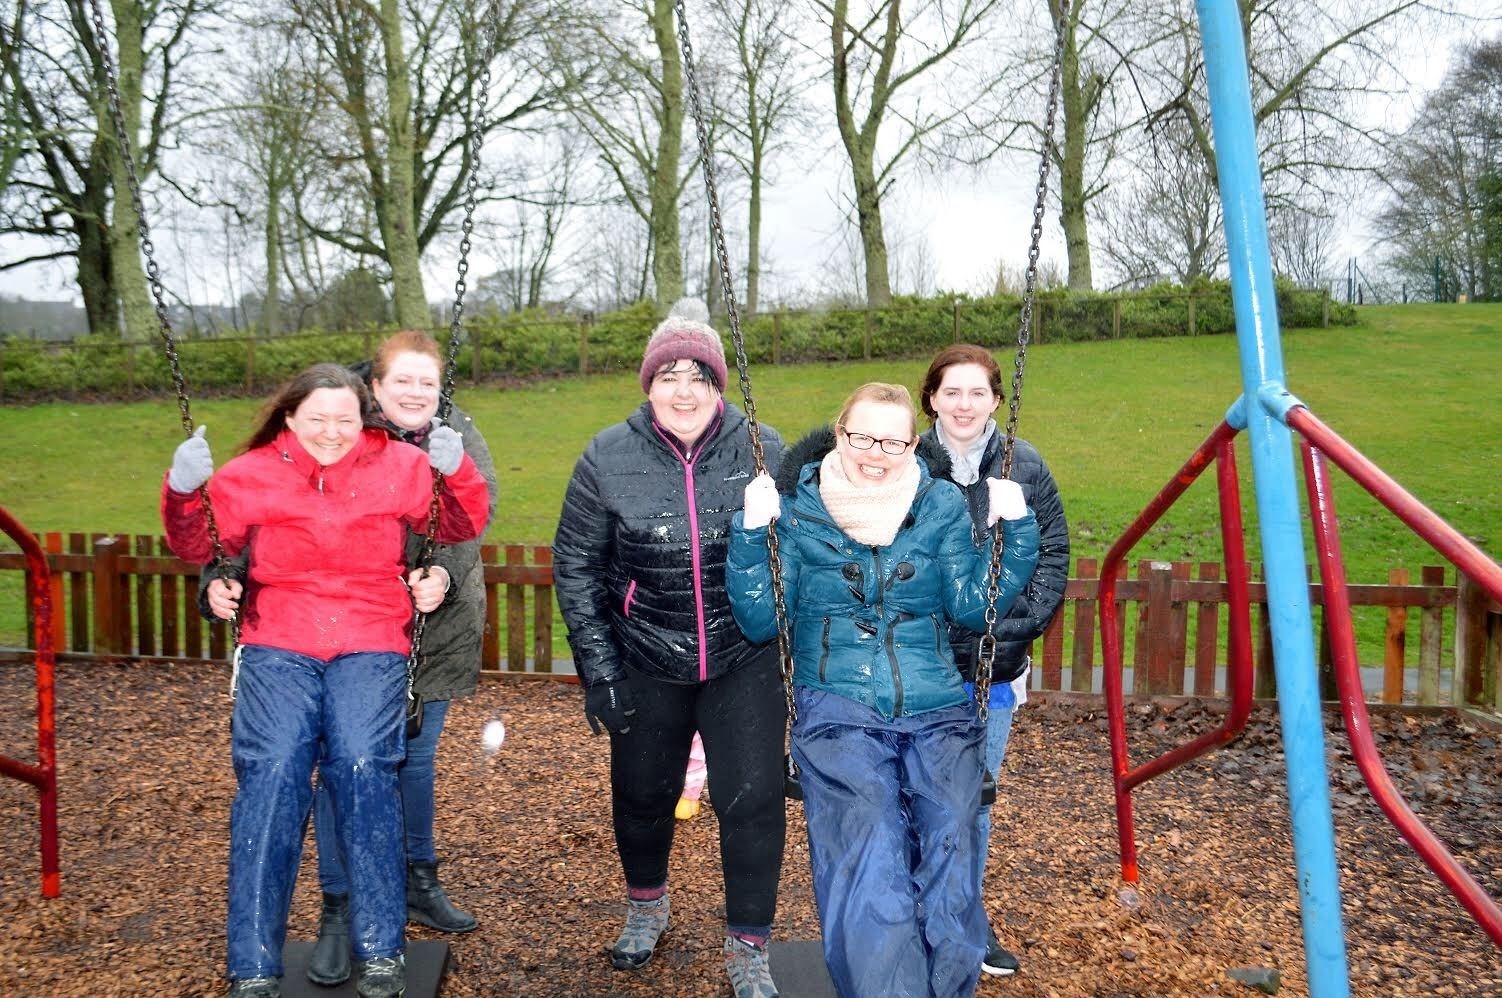 Pictured braving the weather and flying the flag for play park provision are (left to right): Fiona Mackintosh, Mhari Anne Thompson, Lynsey Gilmour, Angela Wilson and Lucy Veals.